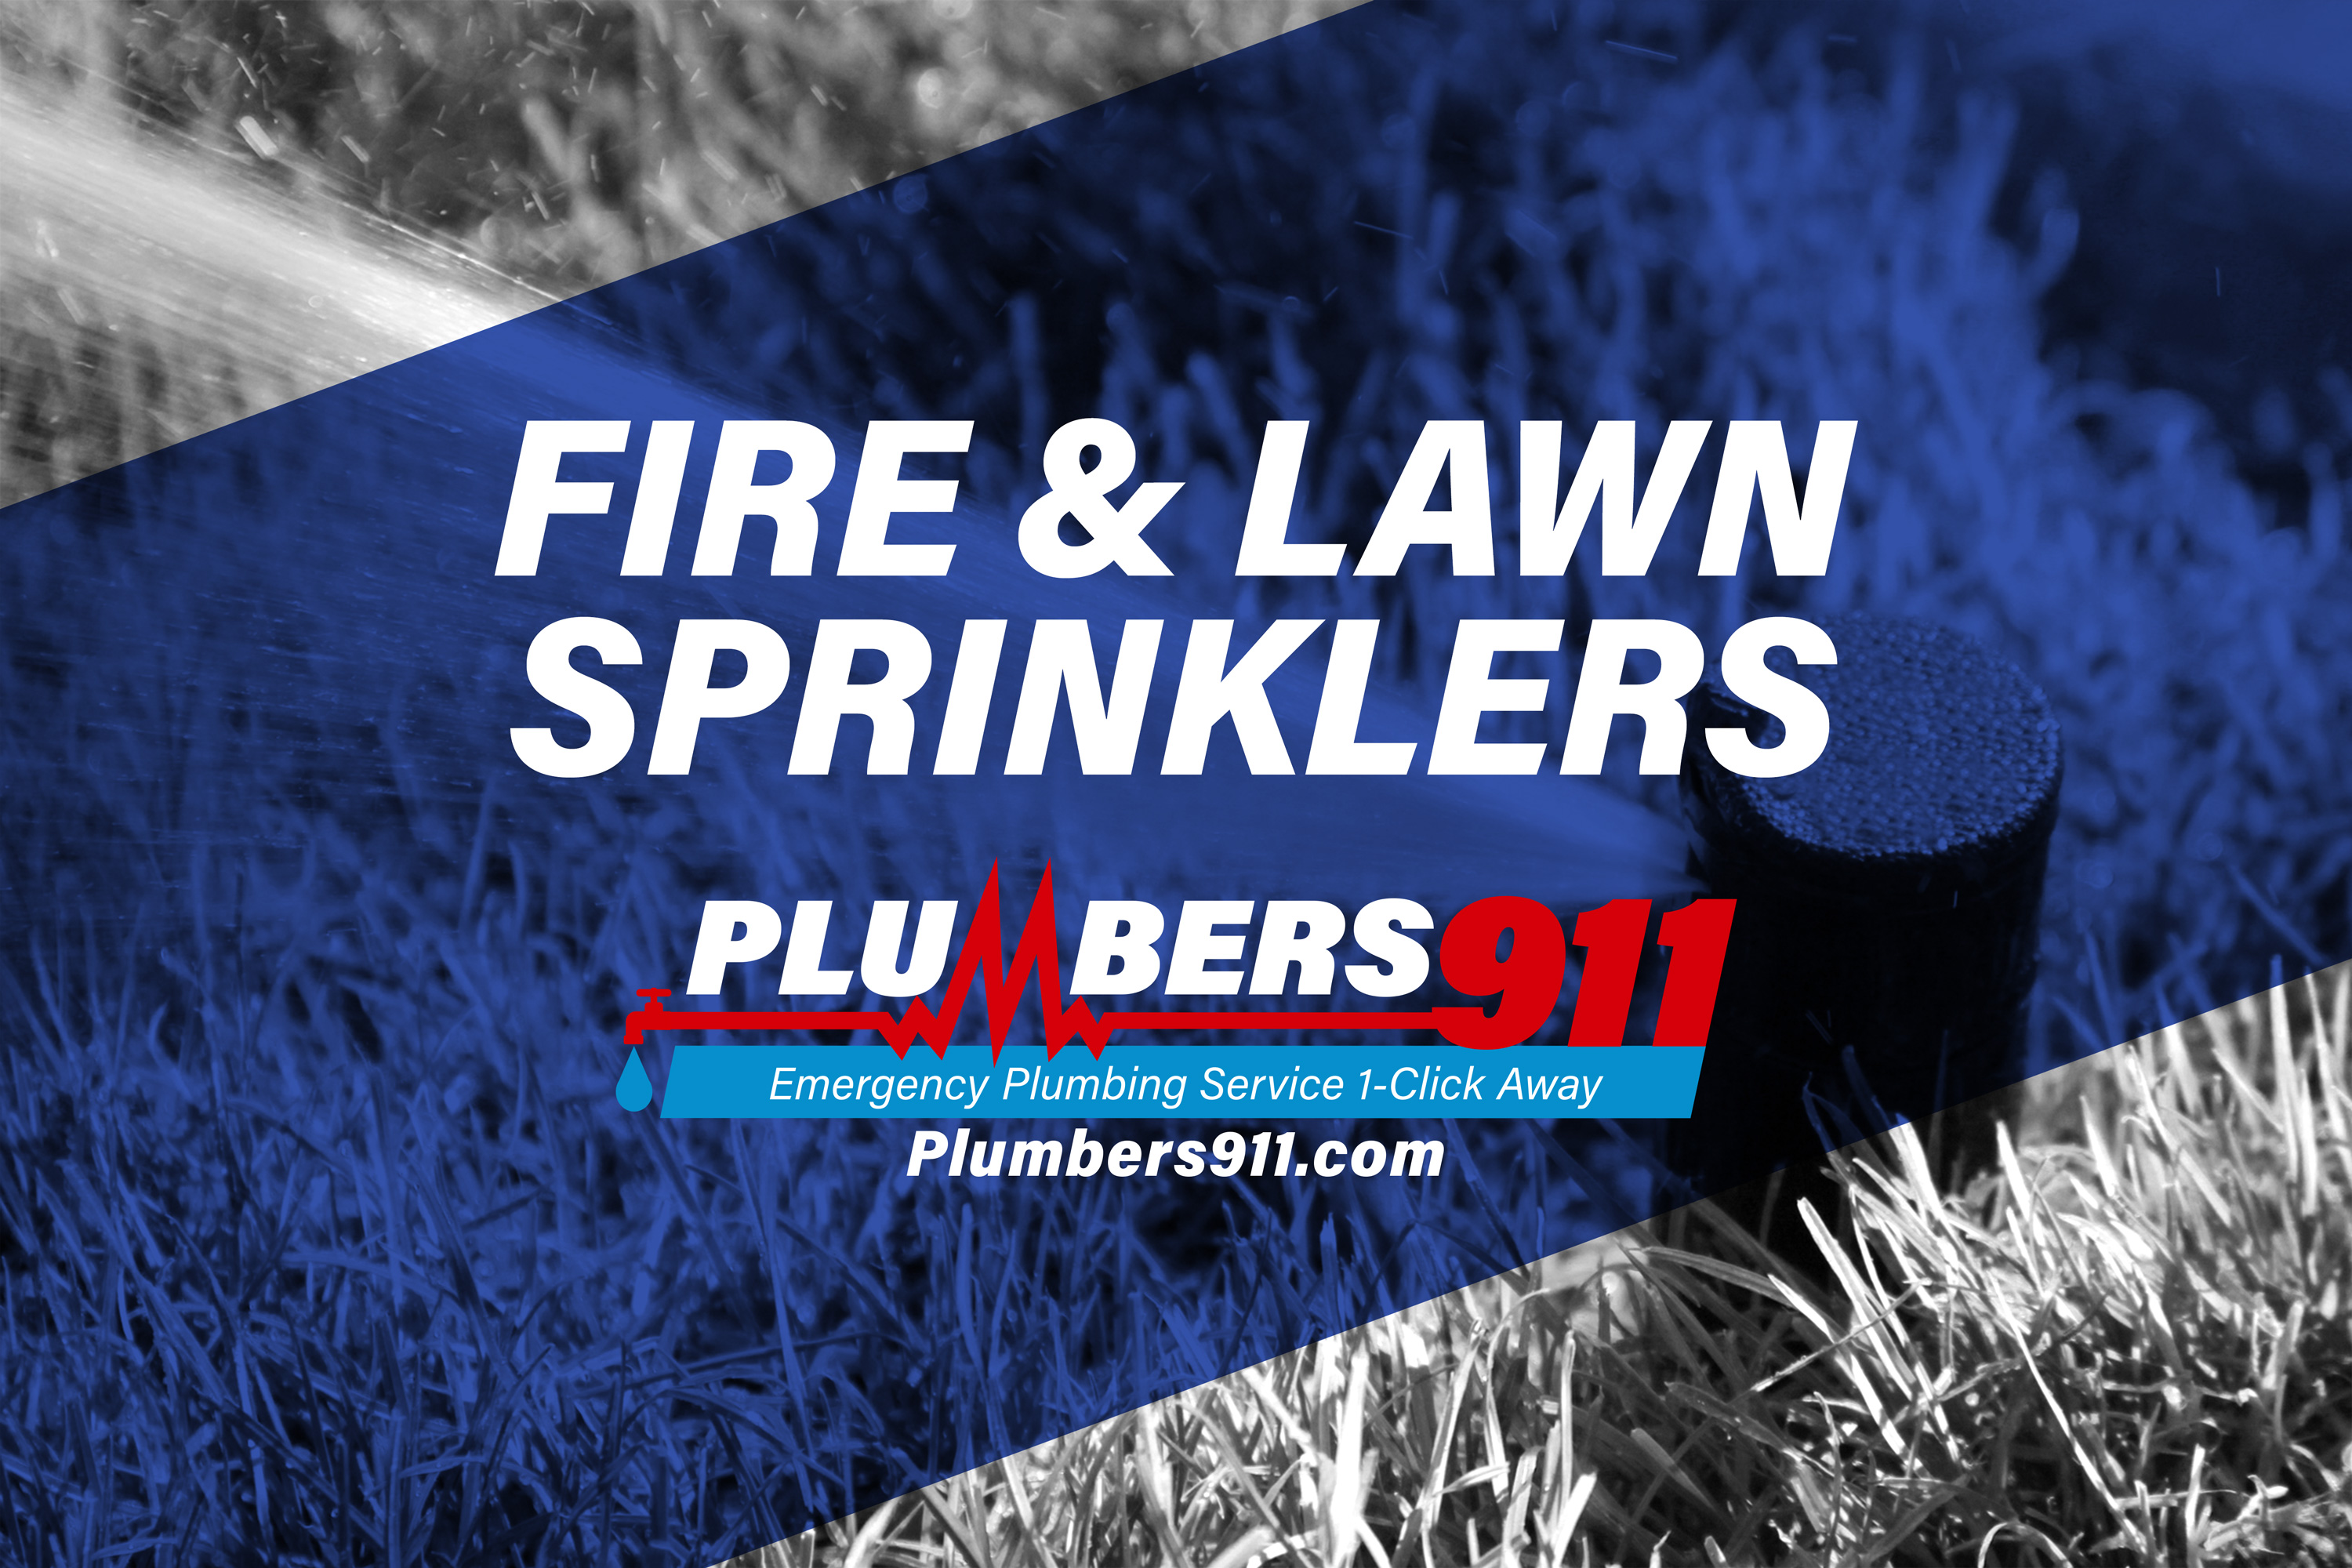 Plumbers 911 - Emergency Plumbing Services - Fire and Lawn Sprinklers